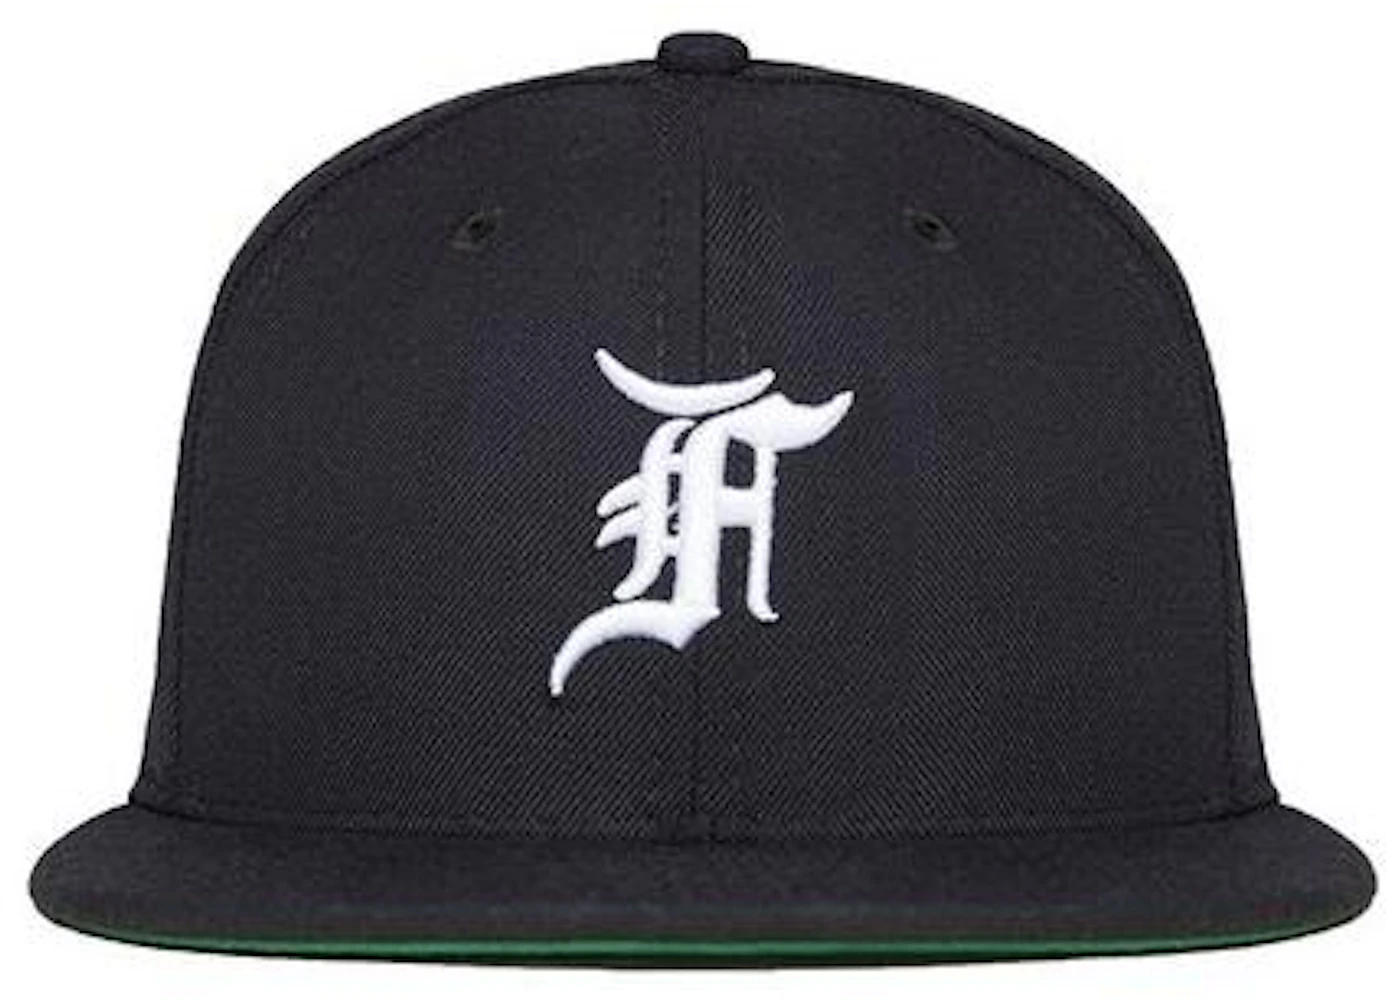 New OF - GOD Fifth US Era Collection FEAR Cap Hat Fitted Navy -